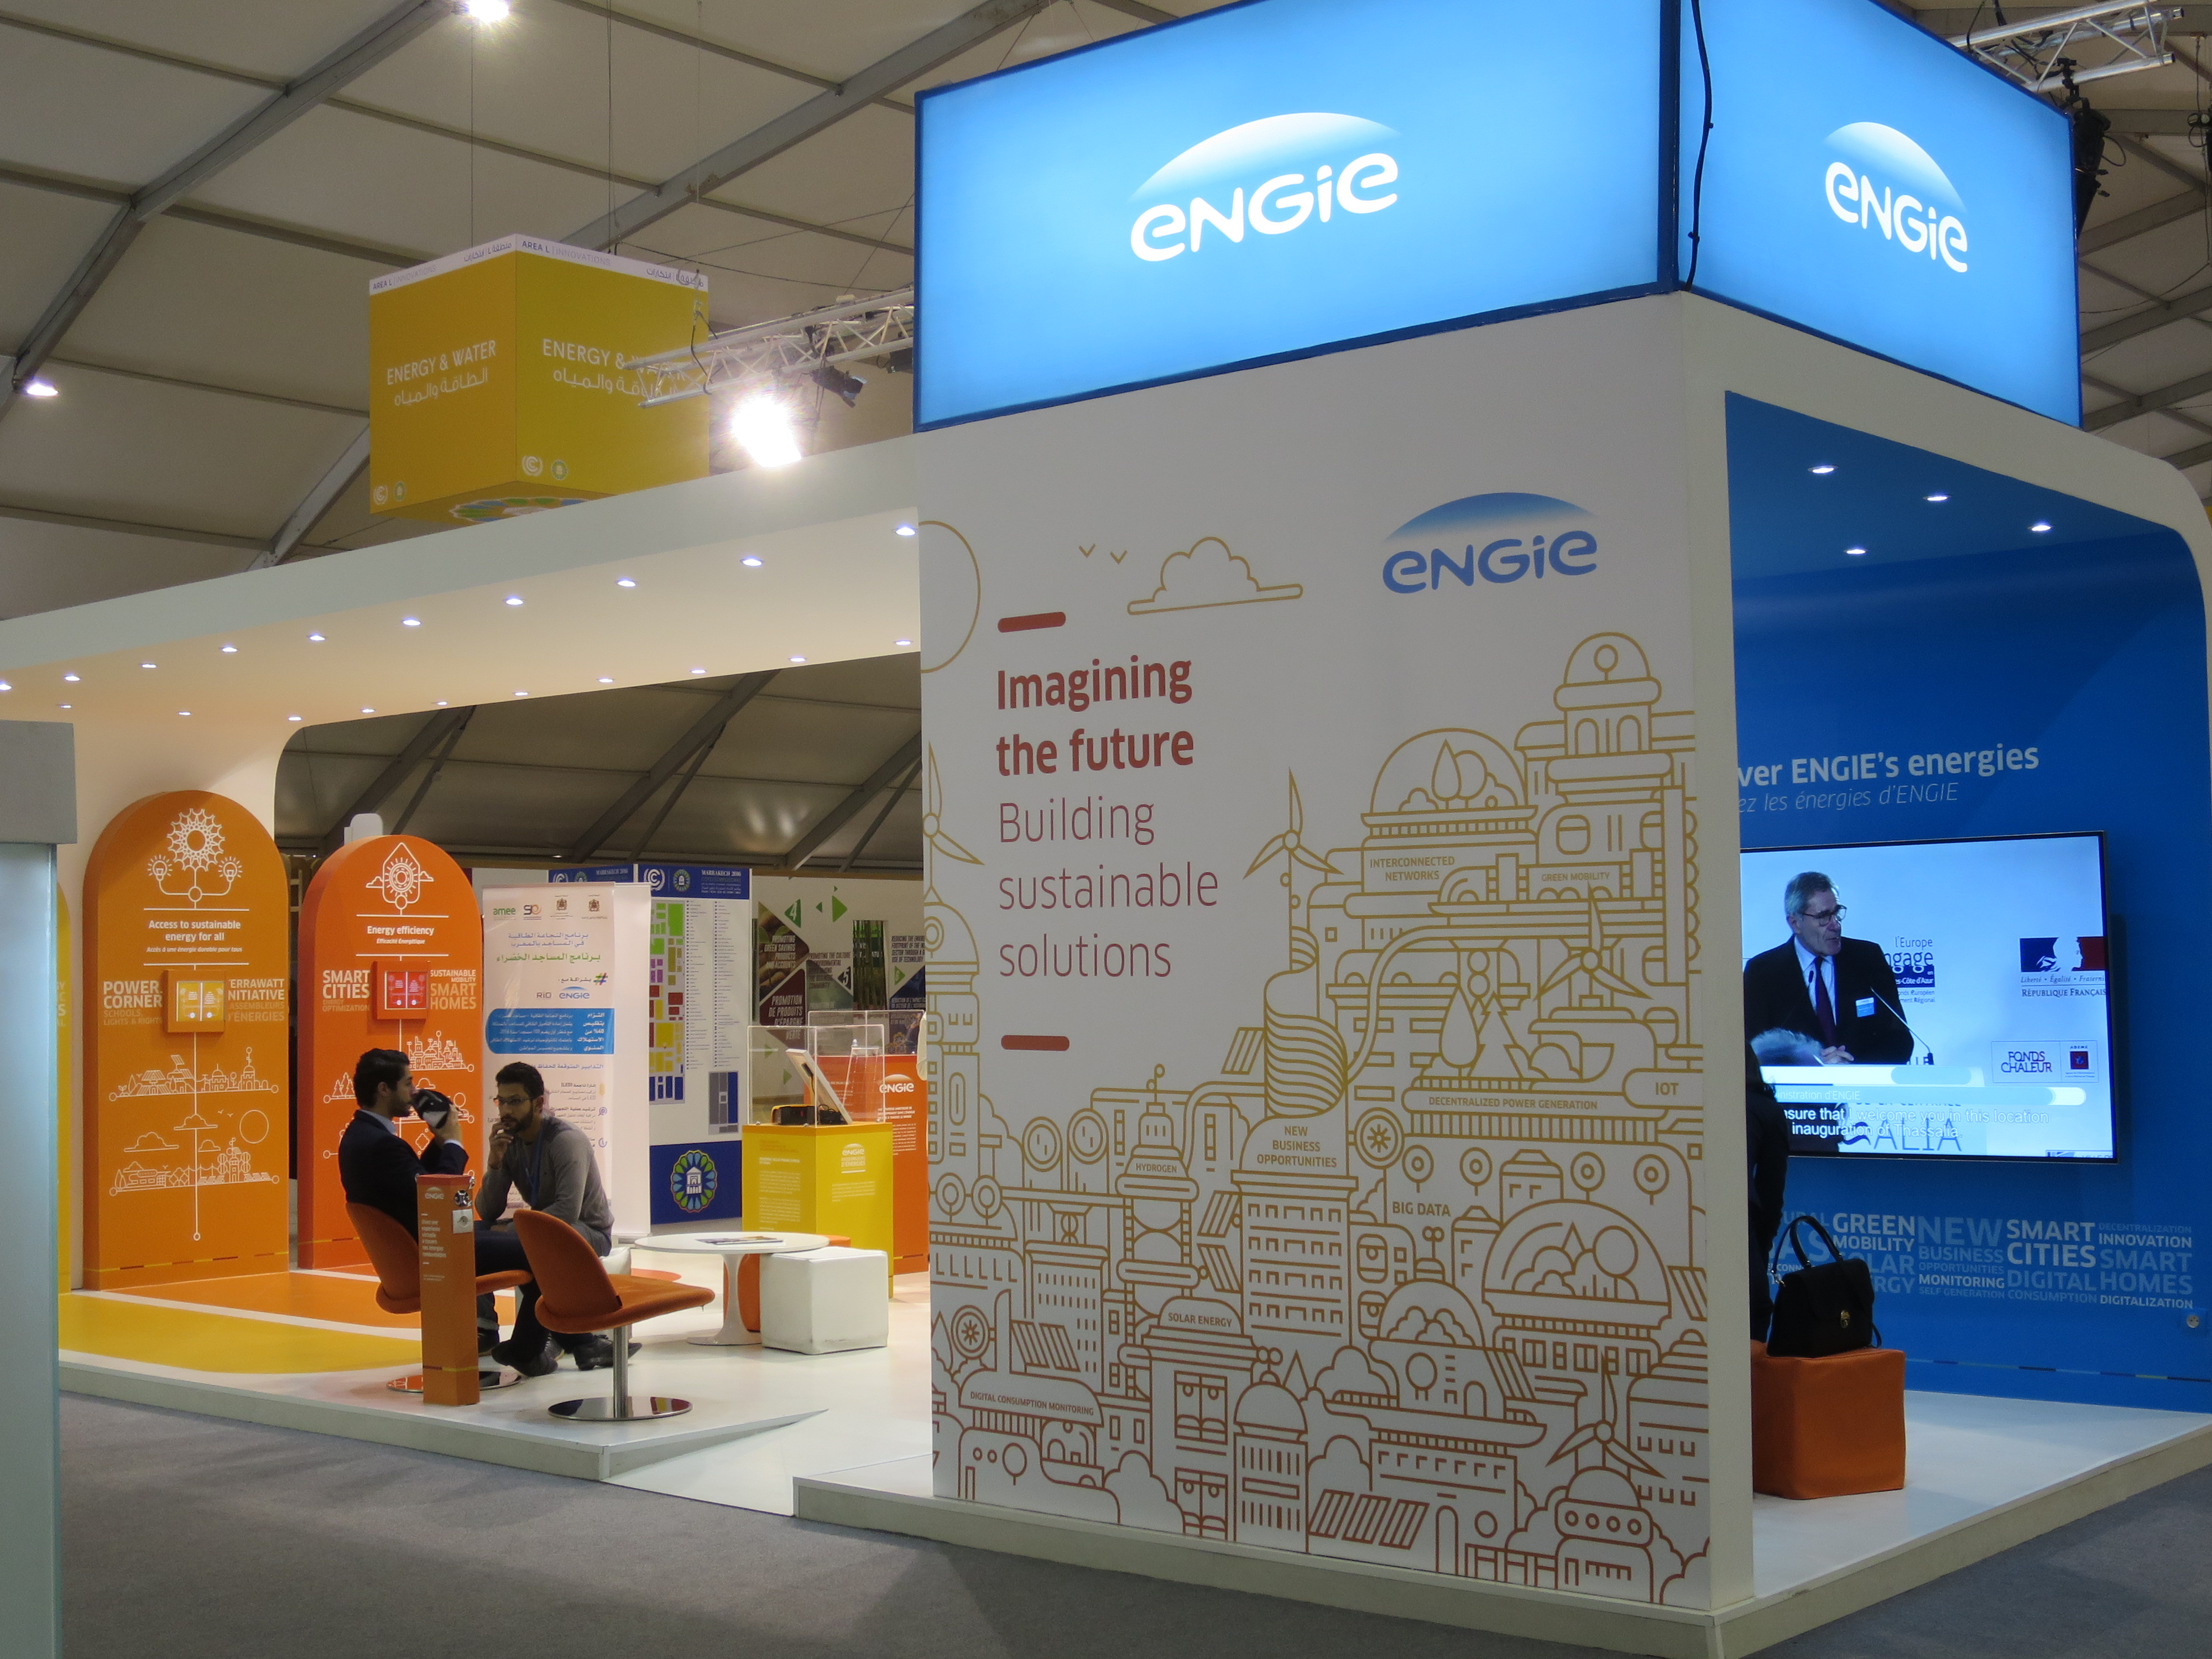 The French multinational energy corporation Engie's booth at the Marrakech climate talks.